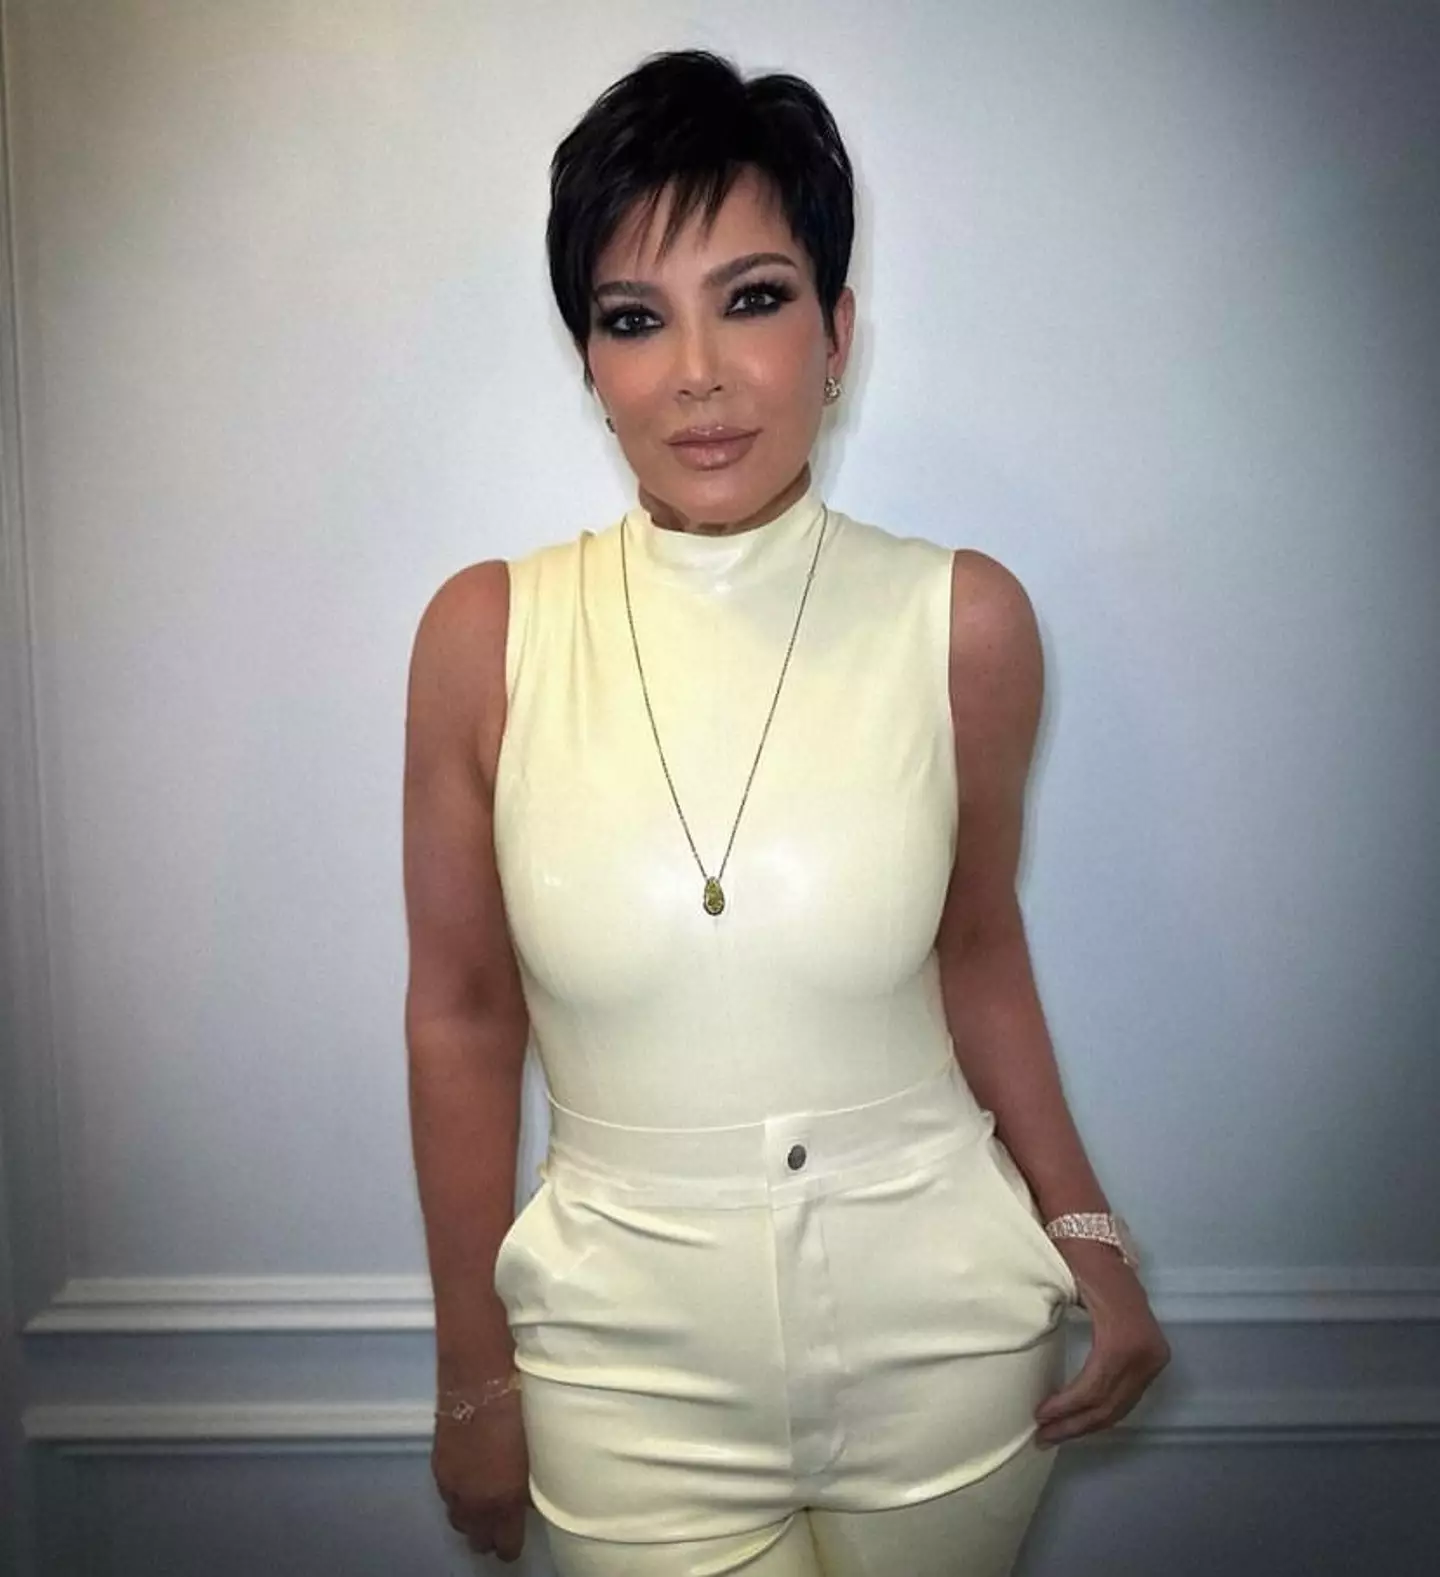 Kris Jenner has been mocked for not knowing the price of fast food.